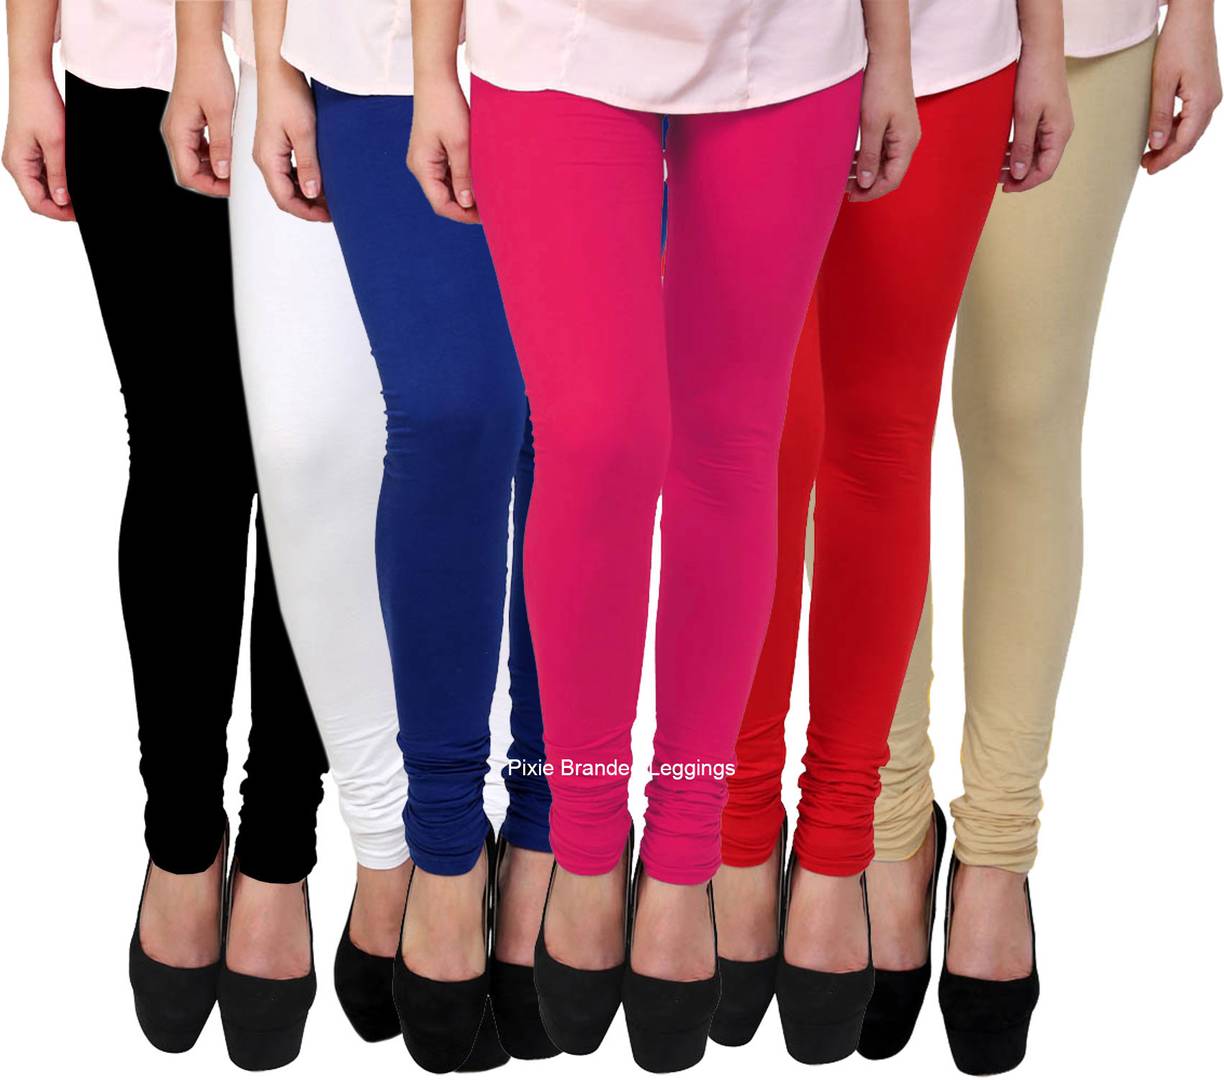 Buy Pixie Women's Soft and 4 Way Stretchable Churidar Leggings Combo (Pack  of 6) Brown,Baby Pink, Orange, Green, Maroon and Yellow - Free Size at  Amazon.in